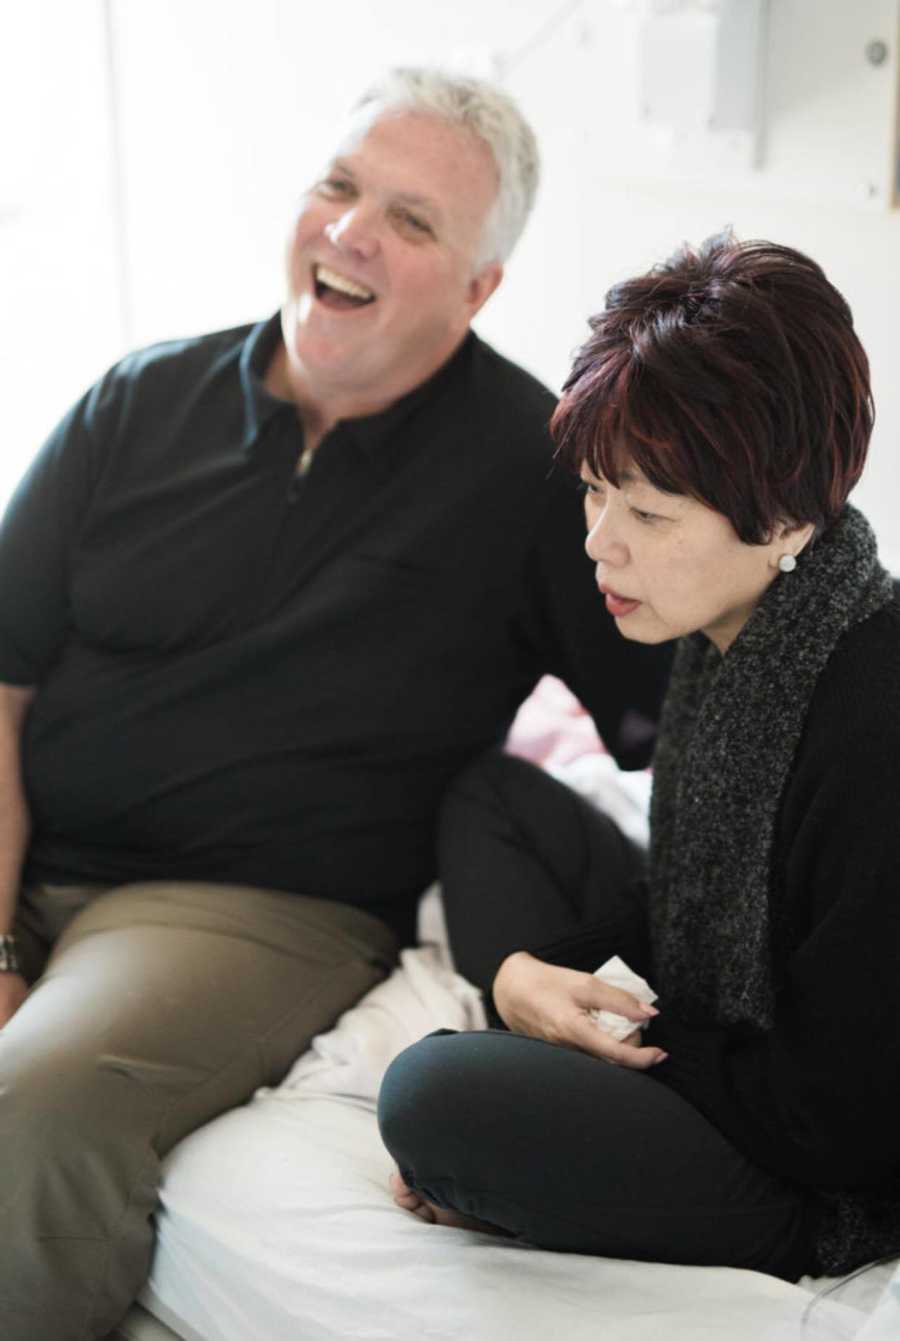 Terminally ill woman sits on hospital bed next to husband who is laughing